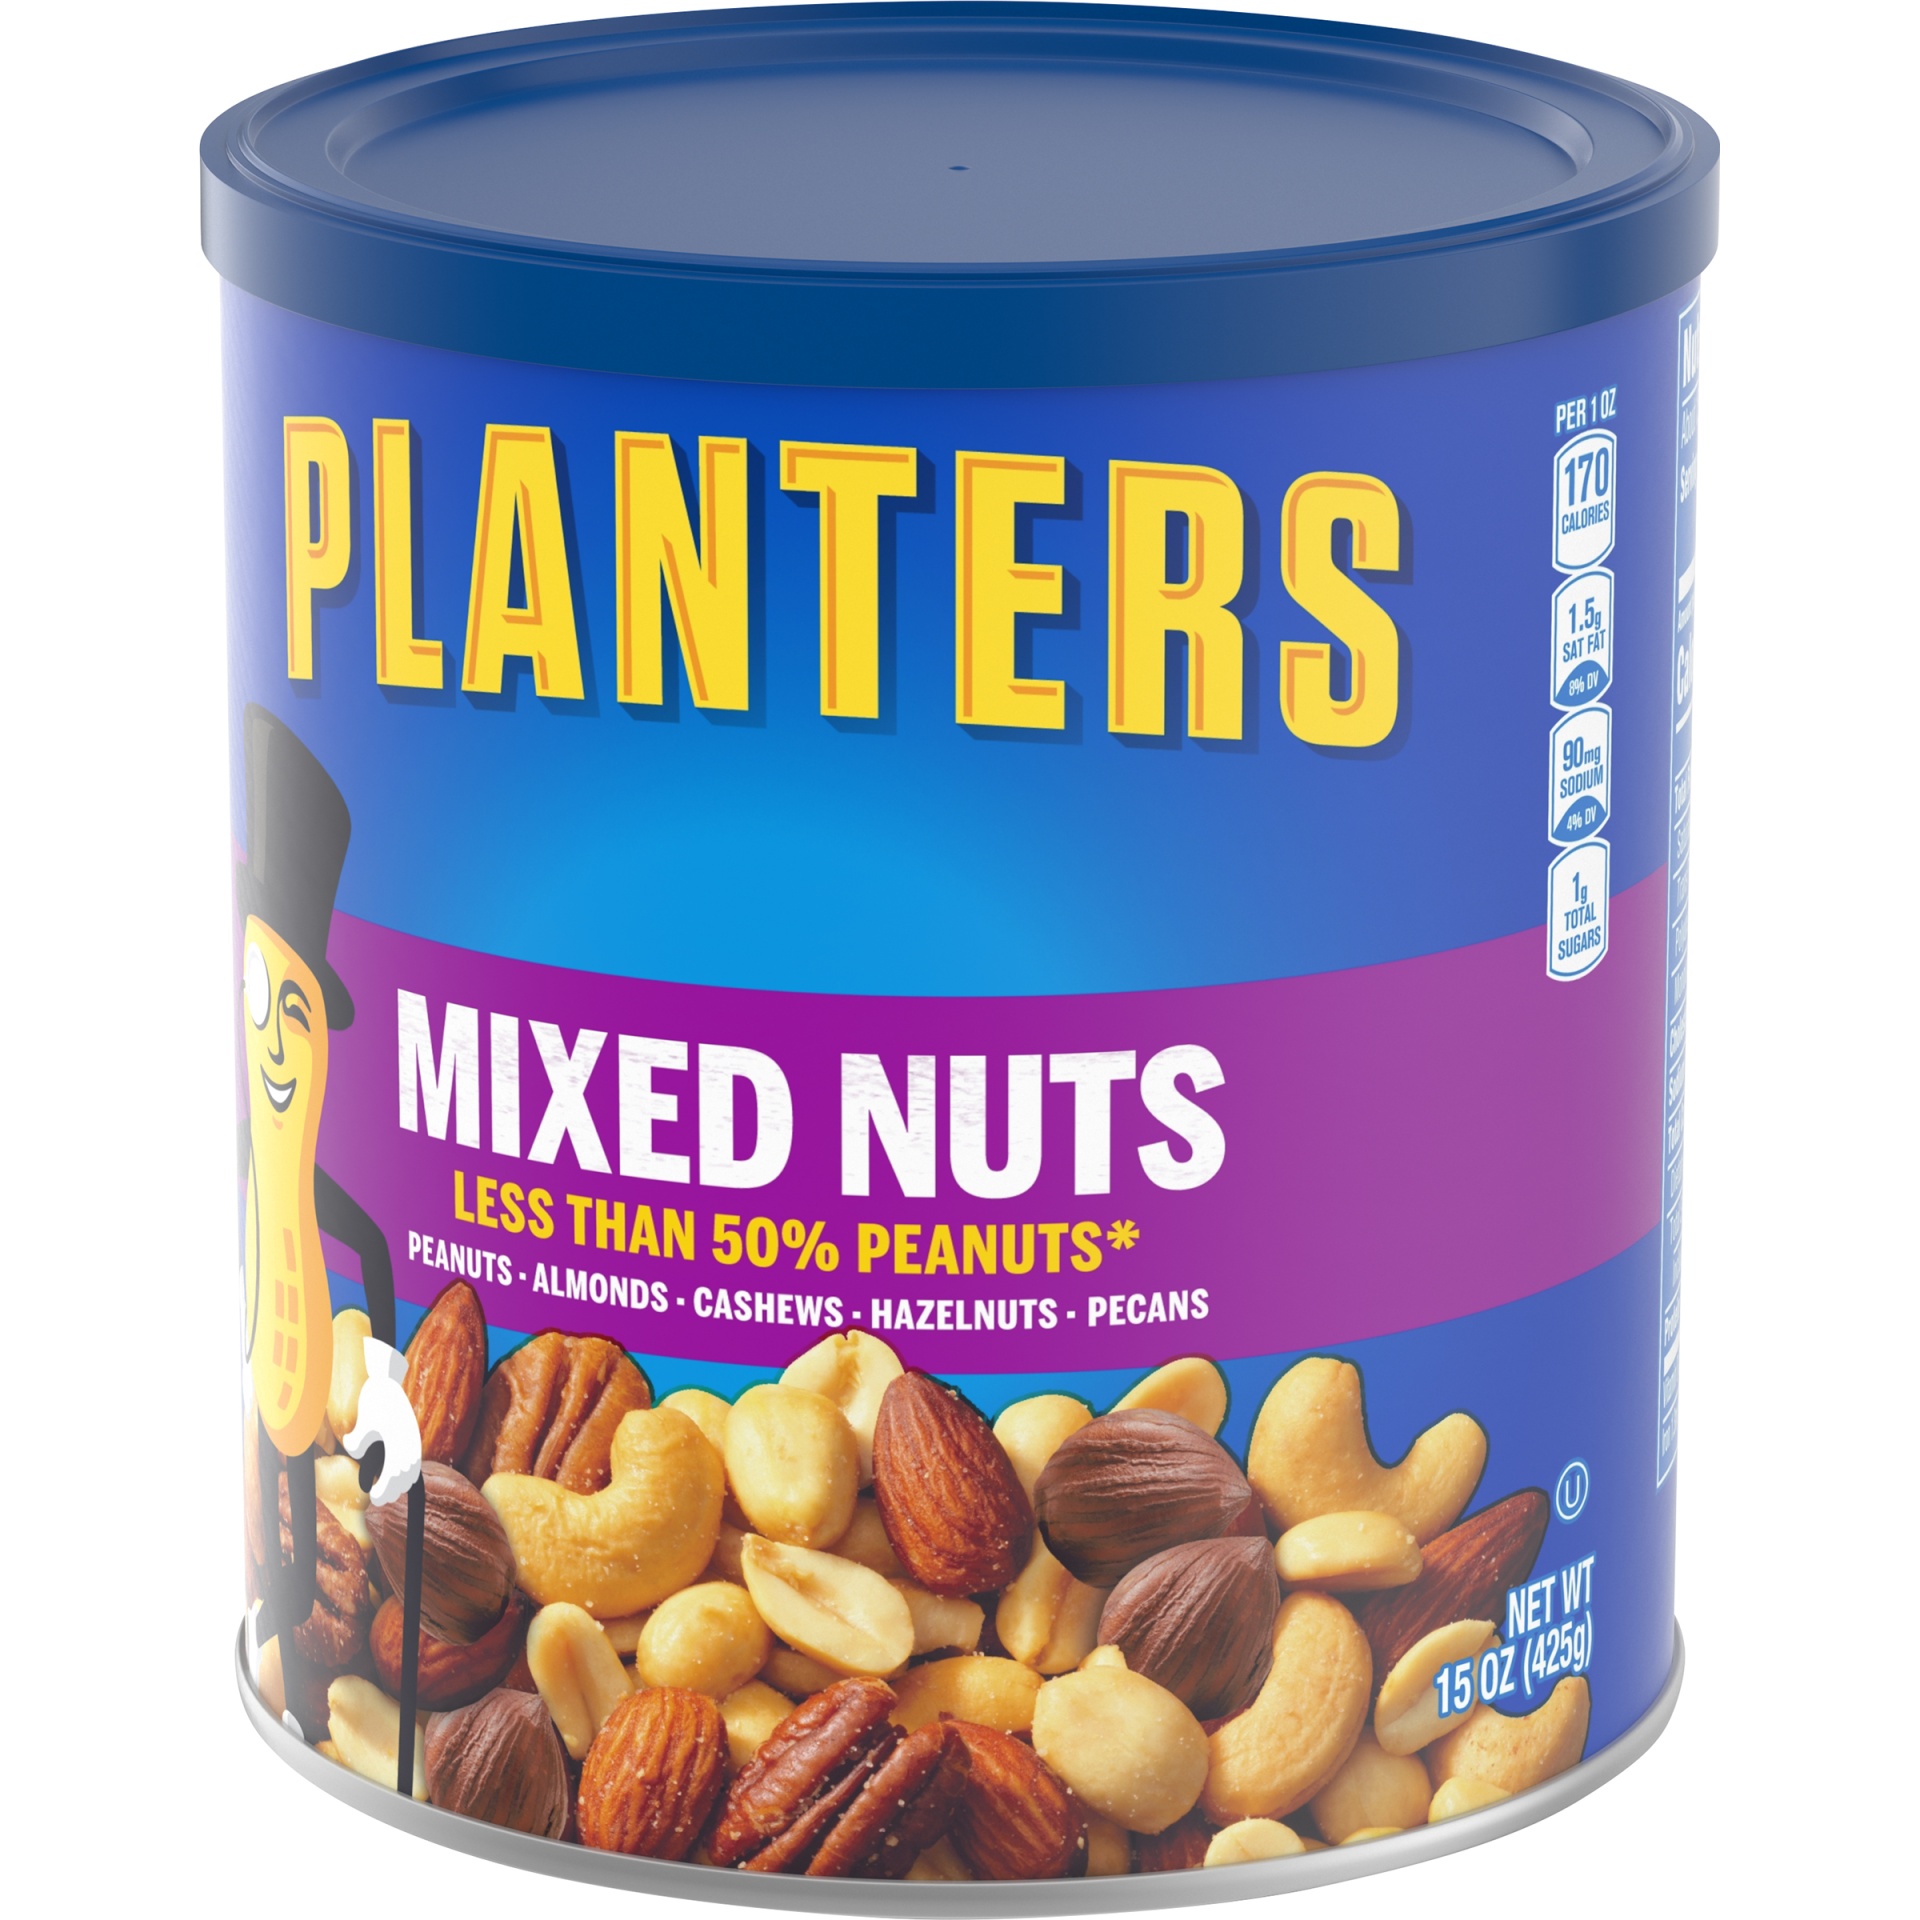 slide 11 of 14, Planters Mixed Nuts Less Than 50% Peanuts with Peanuts, Almonds, Cashews, Hazelnuts & Pecans, 15 oz